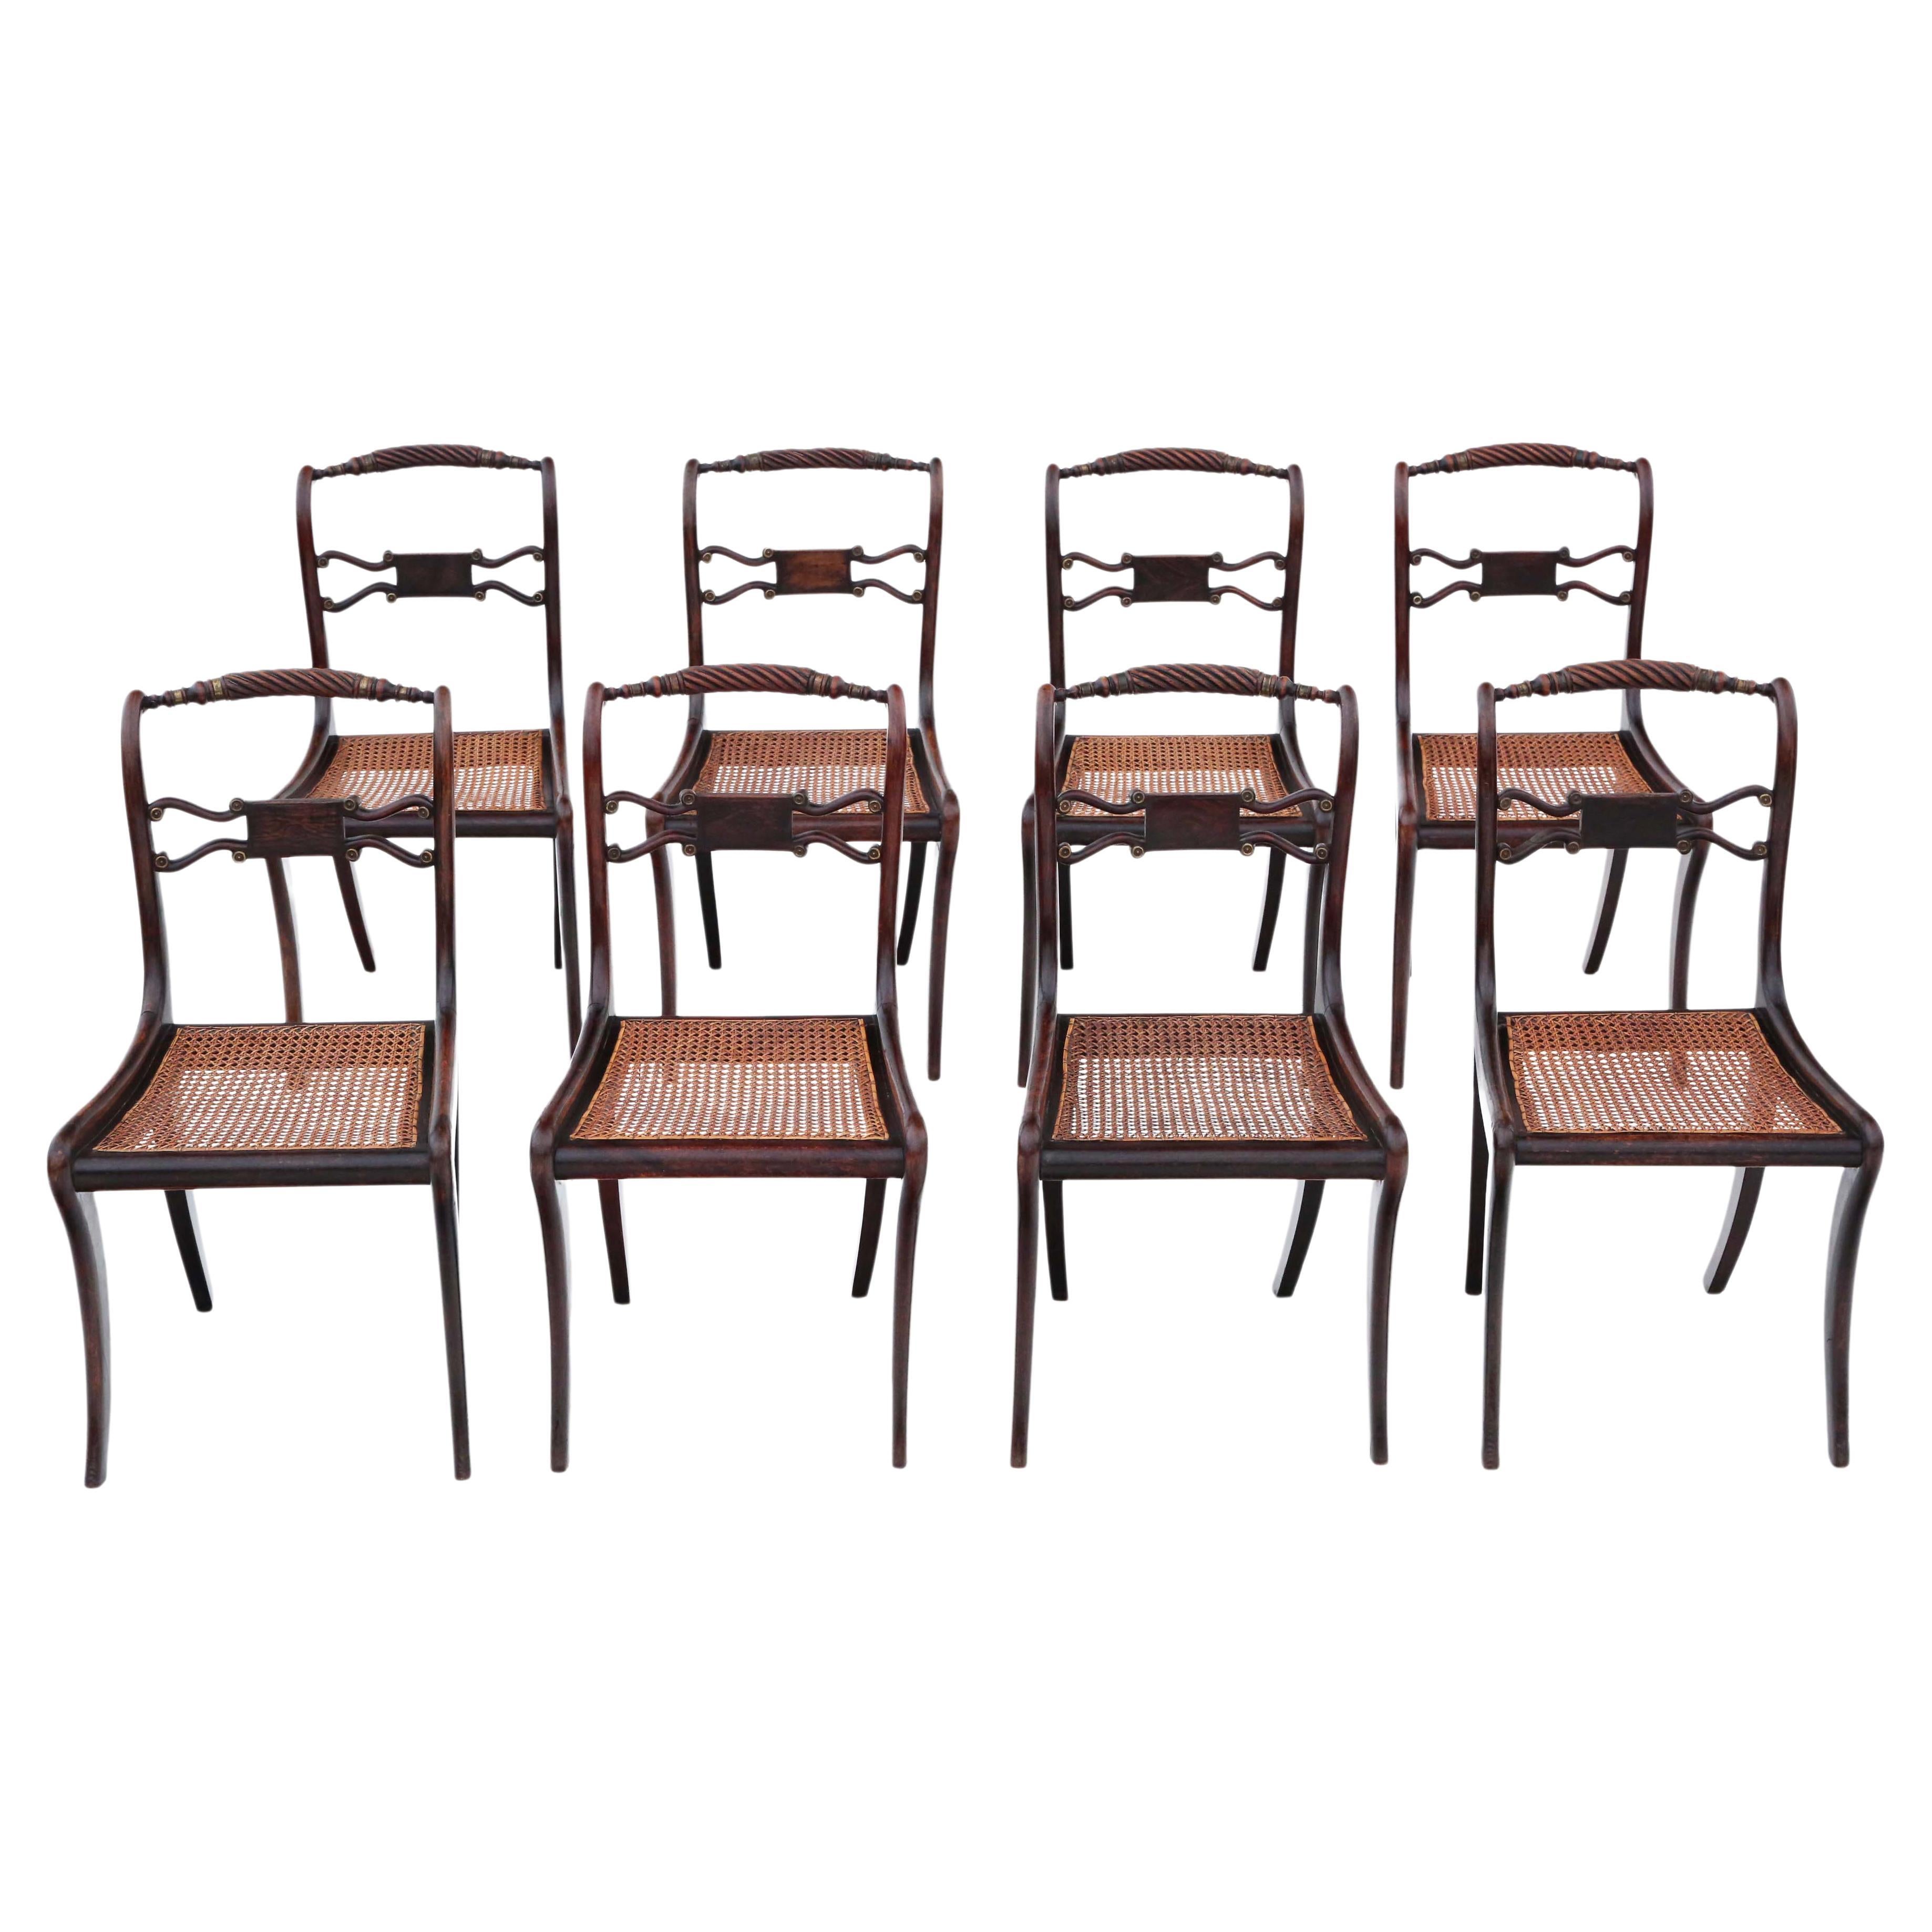 Regency Faux Rosewood Dining Chairs: Set of 8, Antique Quality, 19th Century For Sale